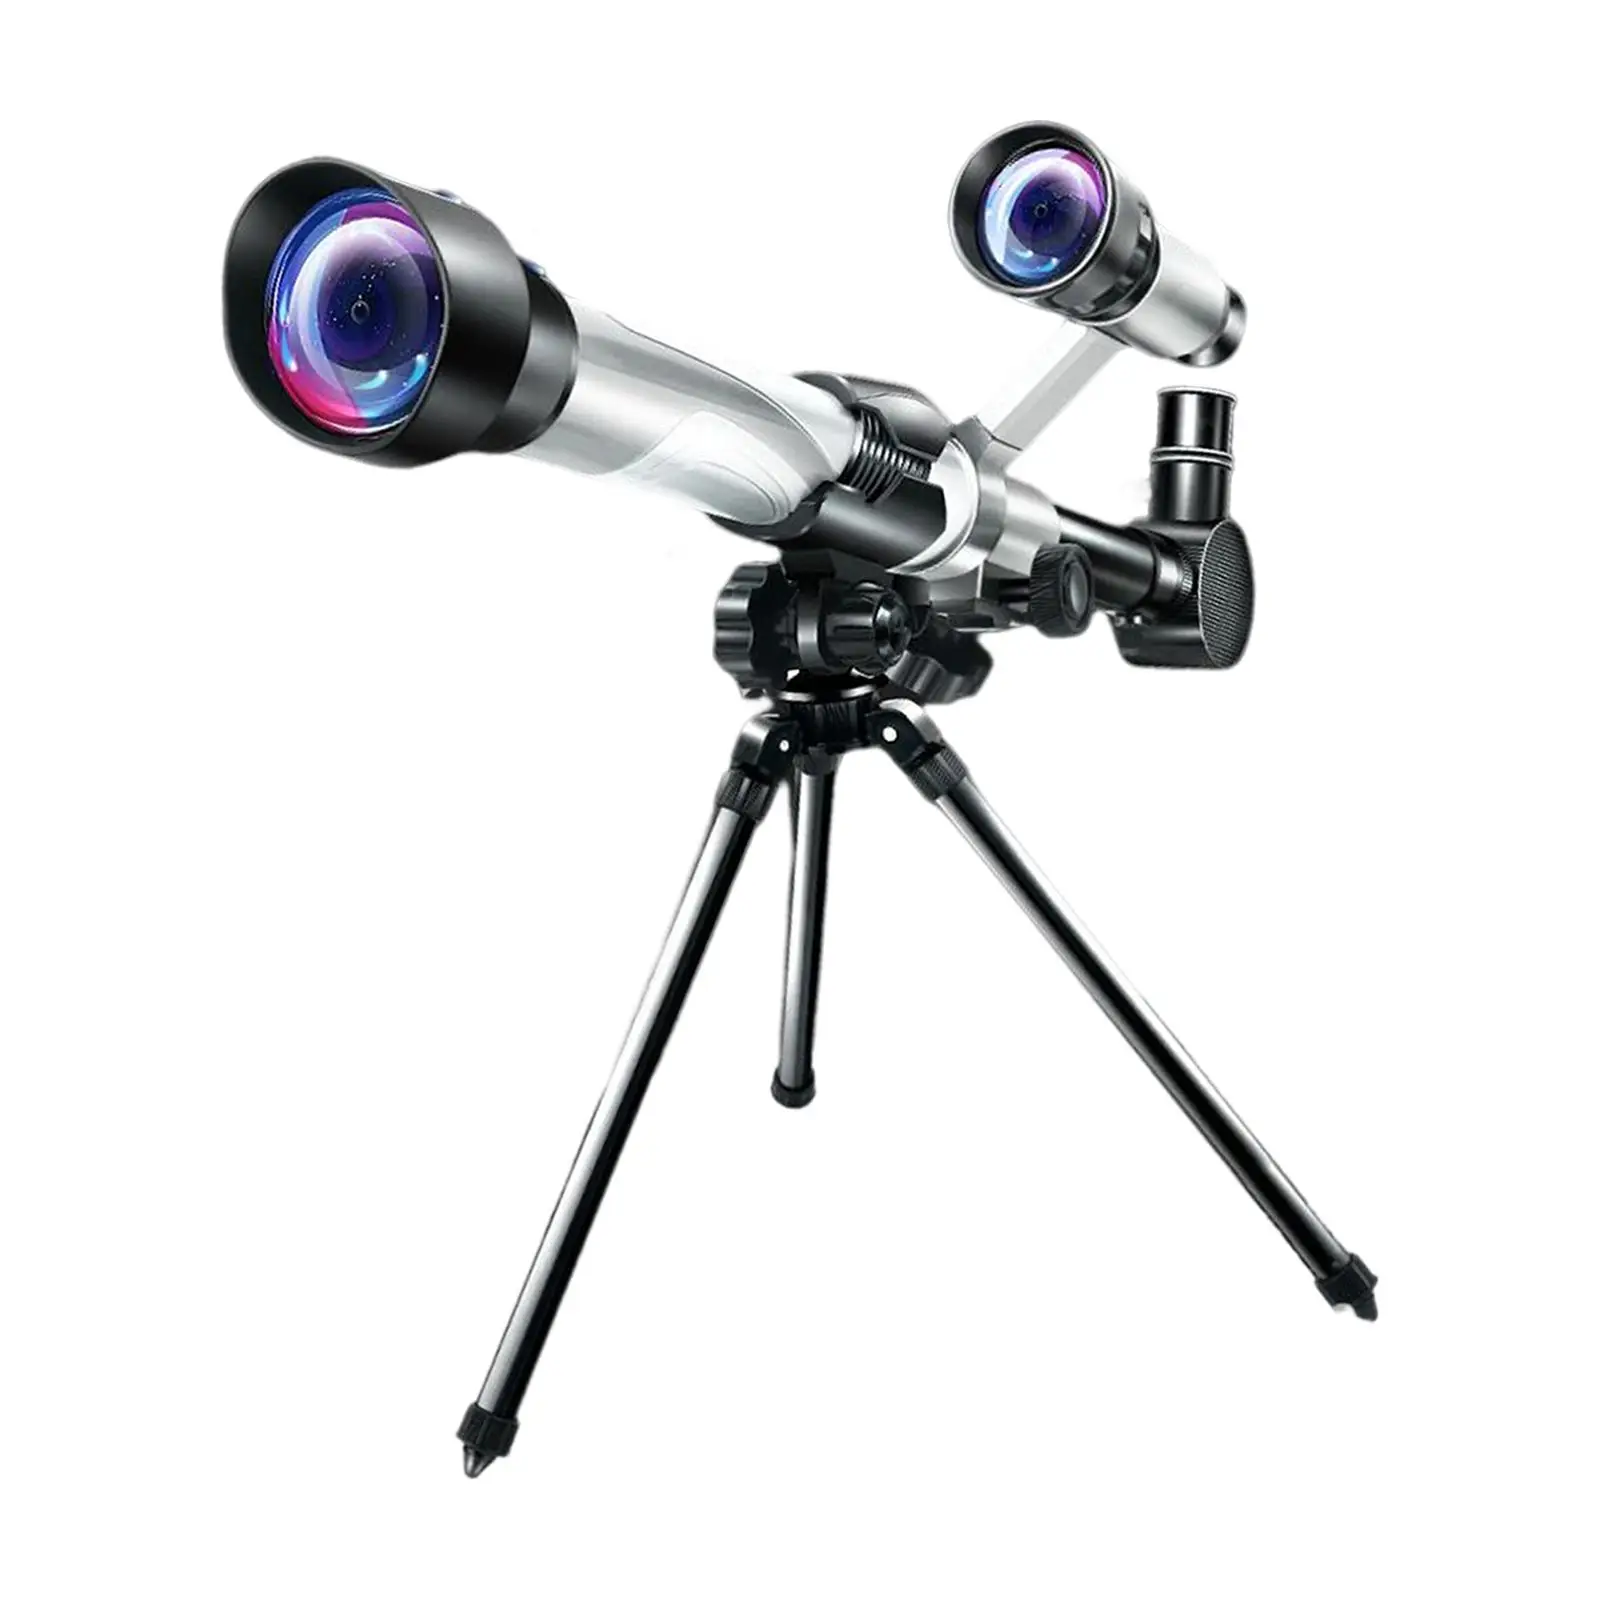 60mm Aperture Telescope with Finder Scope Tripod for Kids Fully Multi Coated Optics Simple to Setup Professional Durable